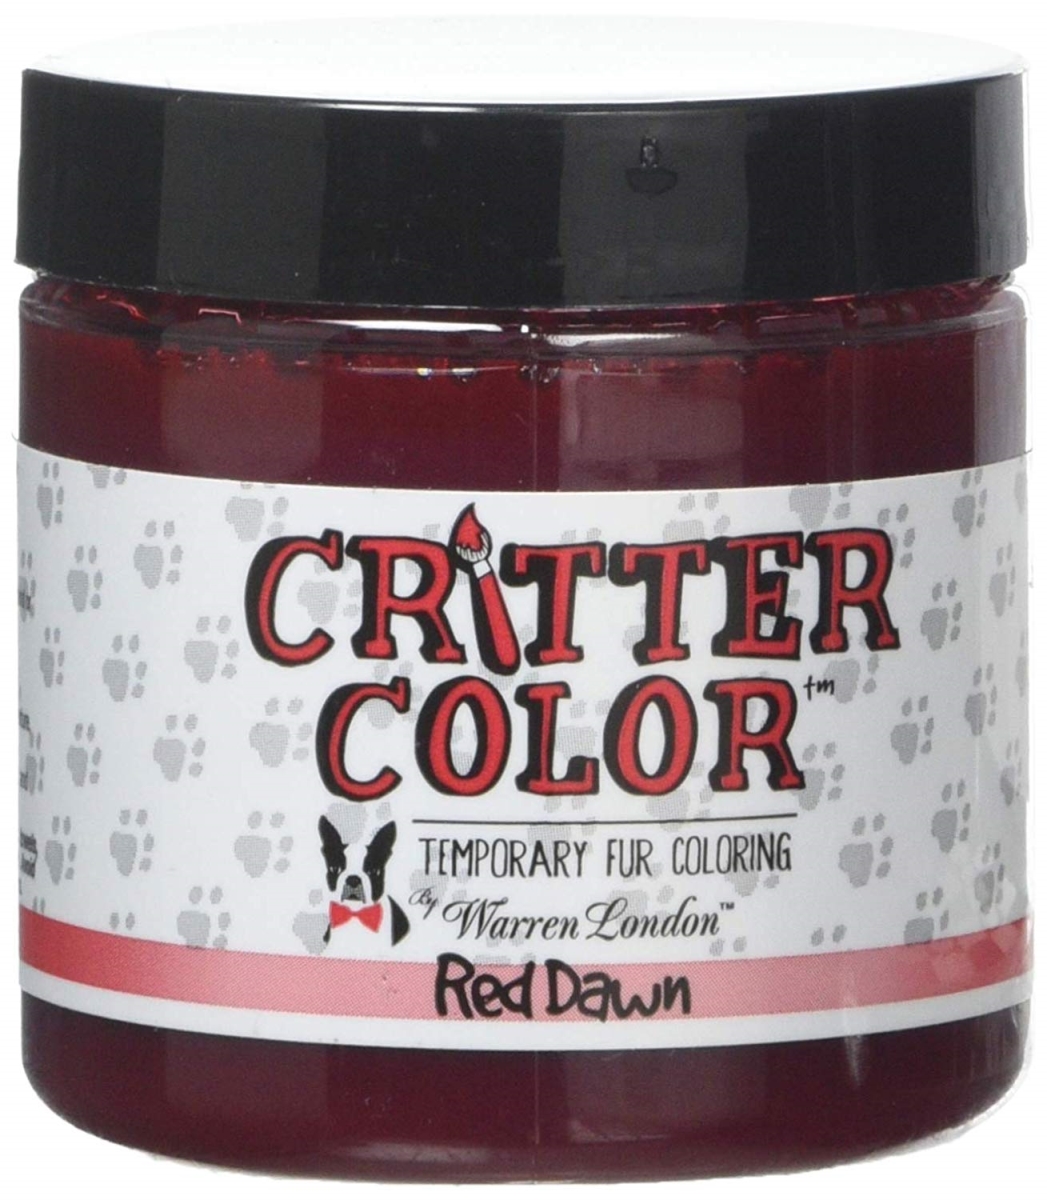 101803 Critter Color Temporary Fur Coloring For Dogs - Red Dawn